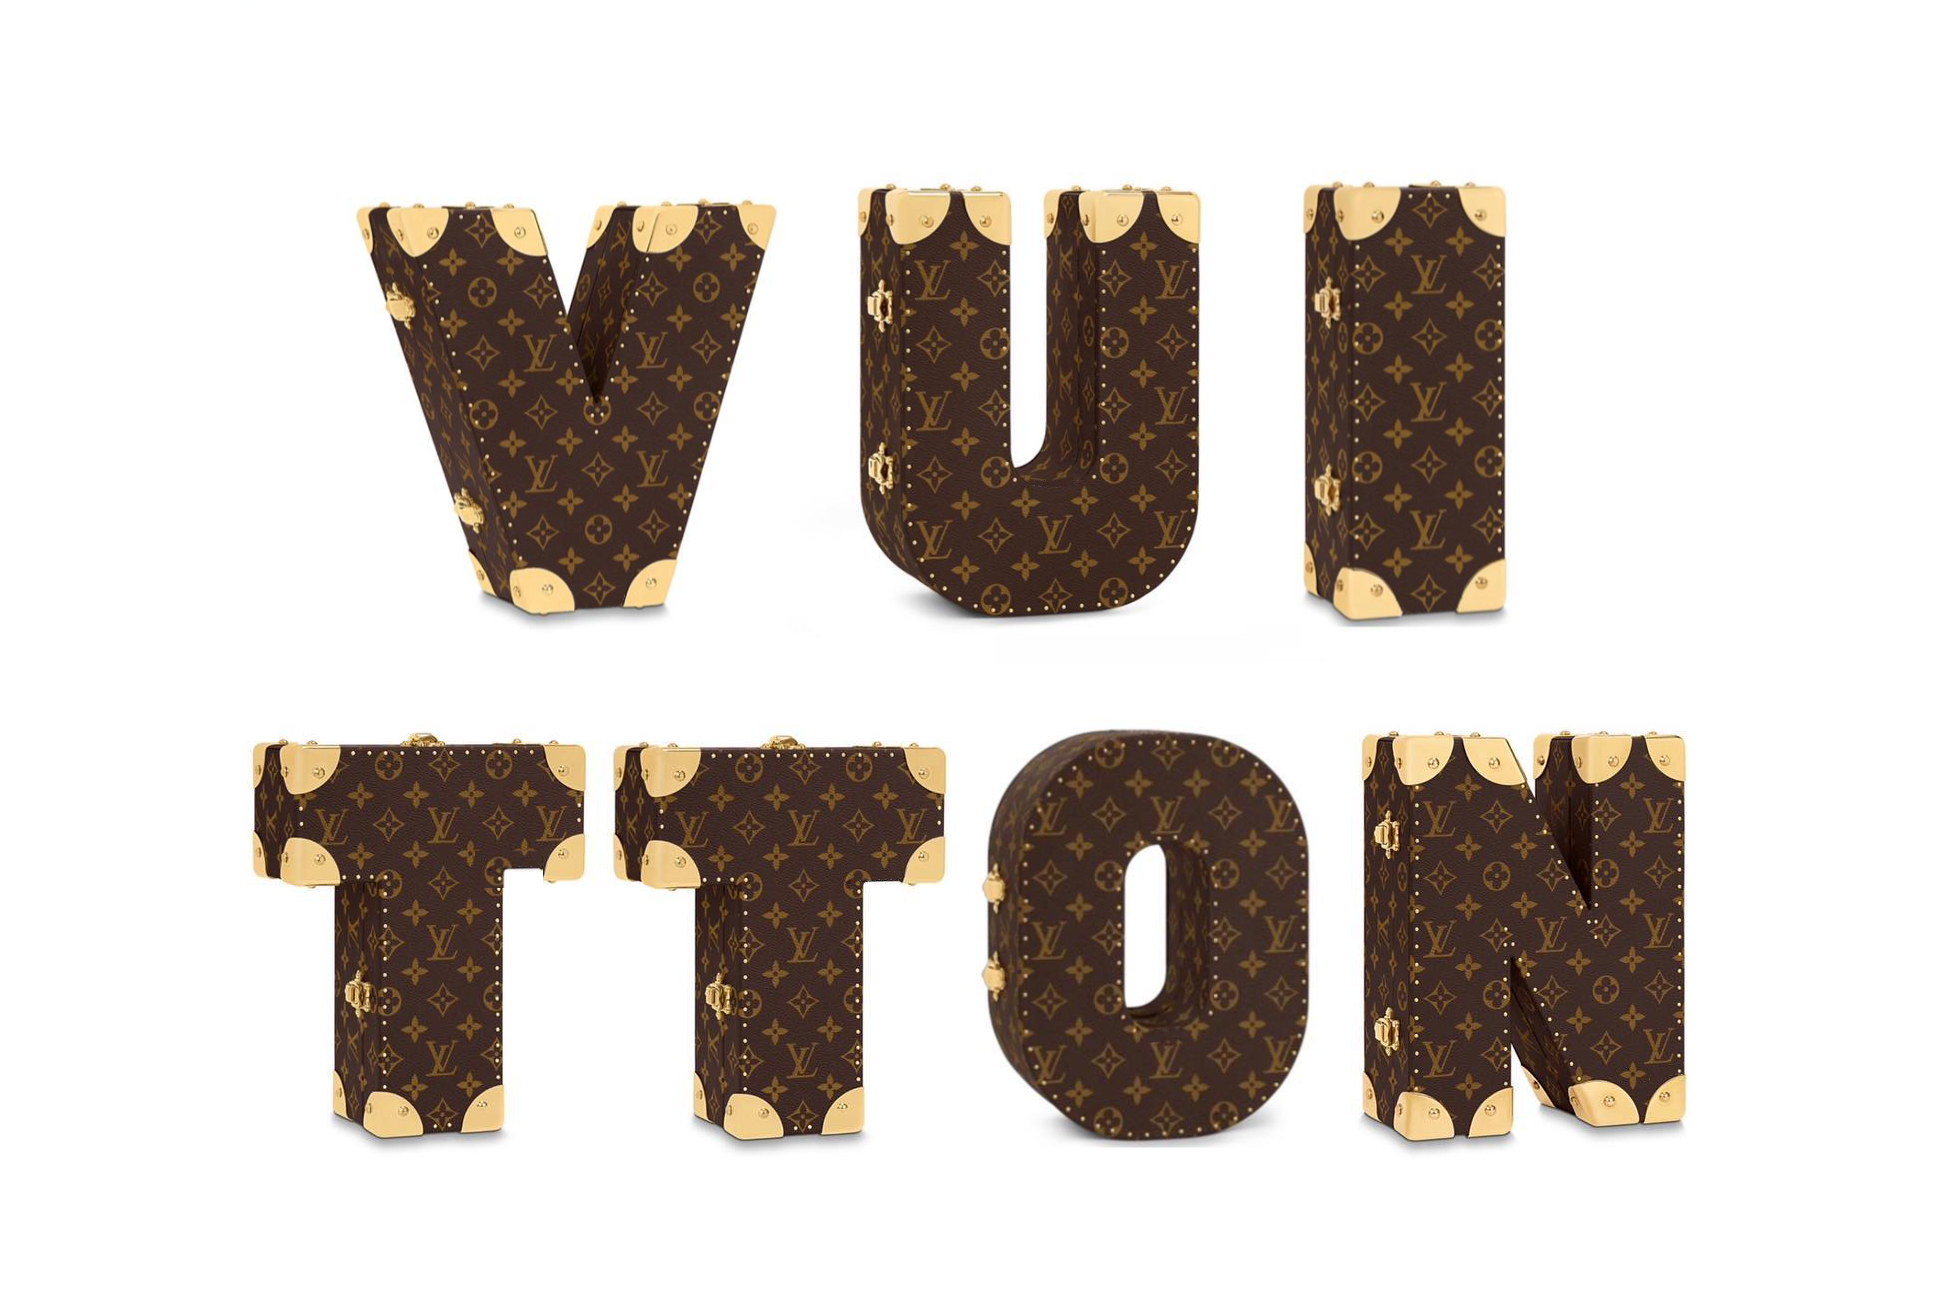 Louis Vuitton's Alphabet Trunk collection spells out "VUITTON" in monogrammed canvas